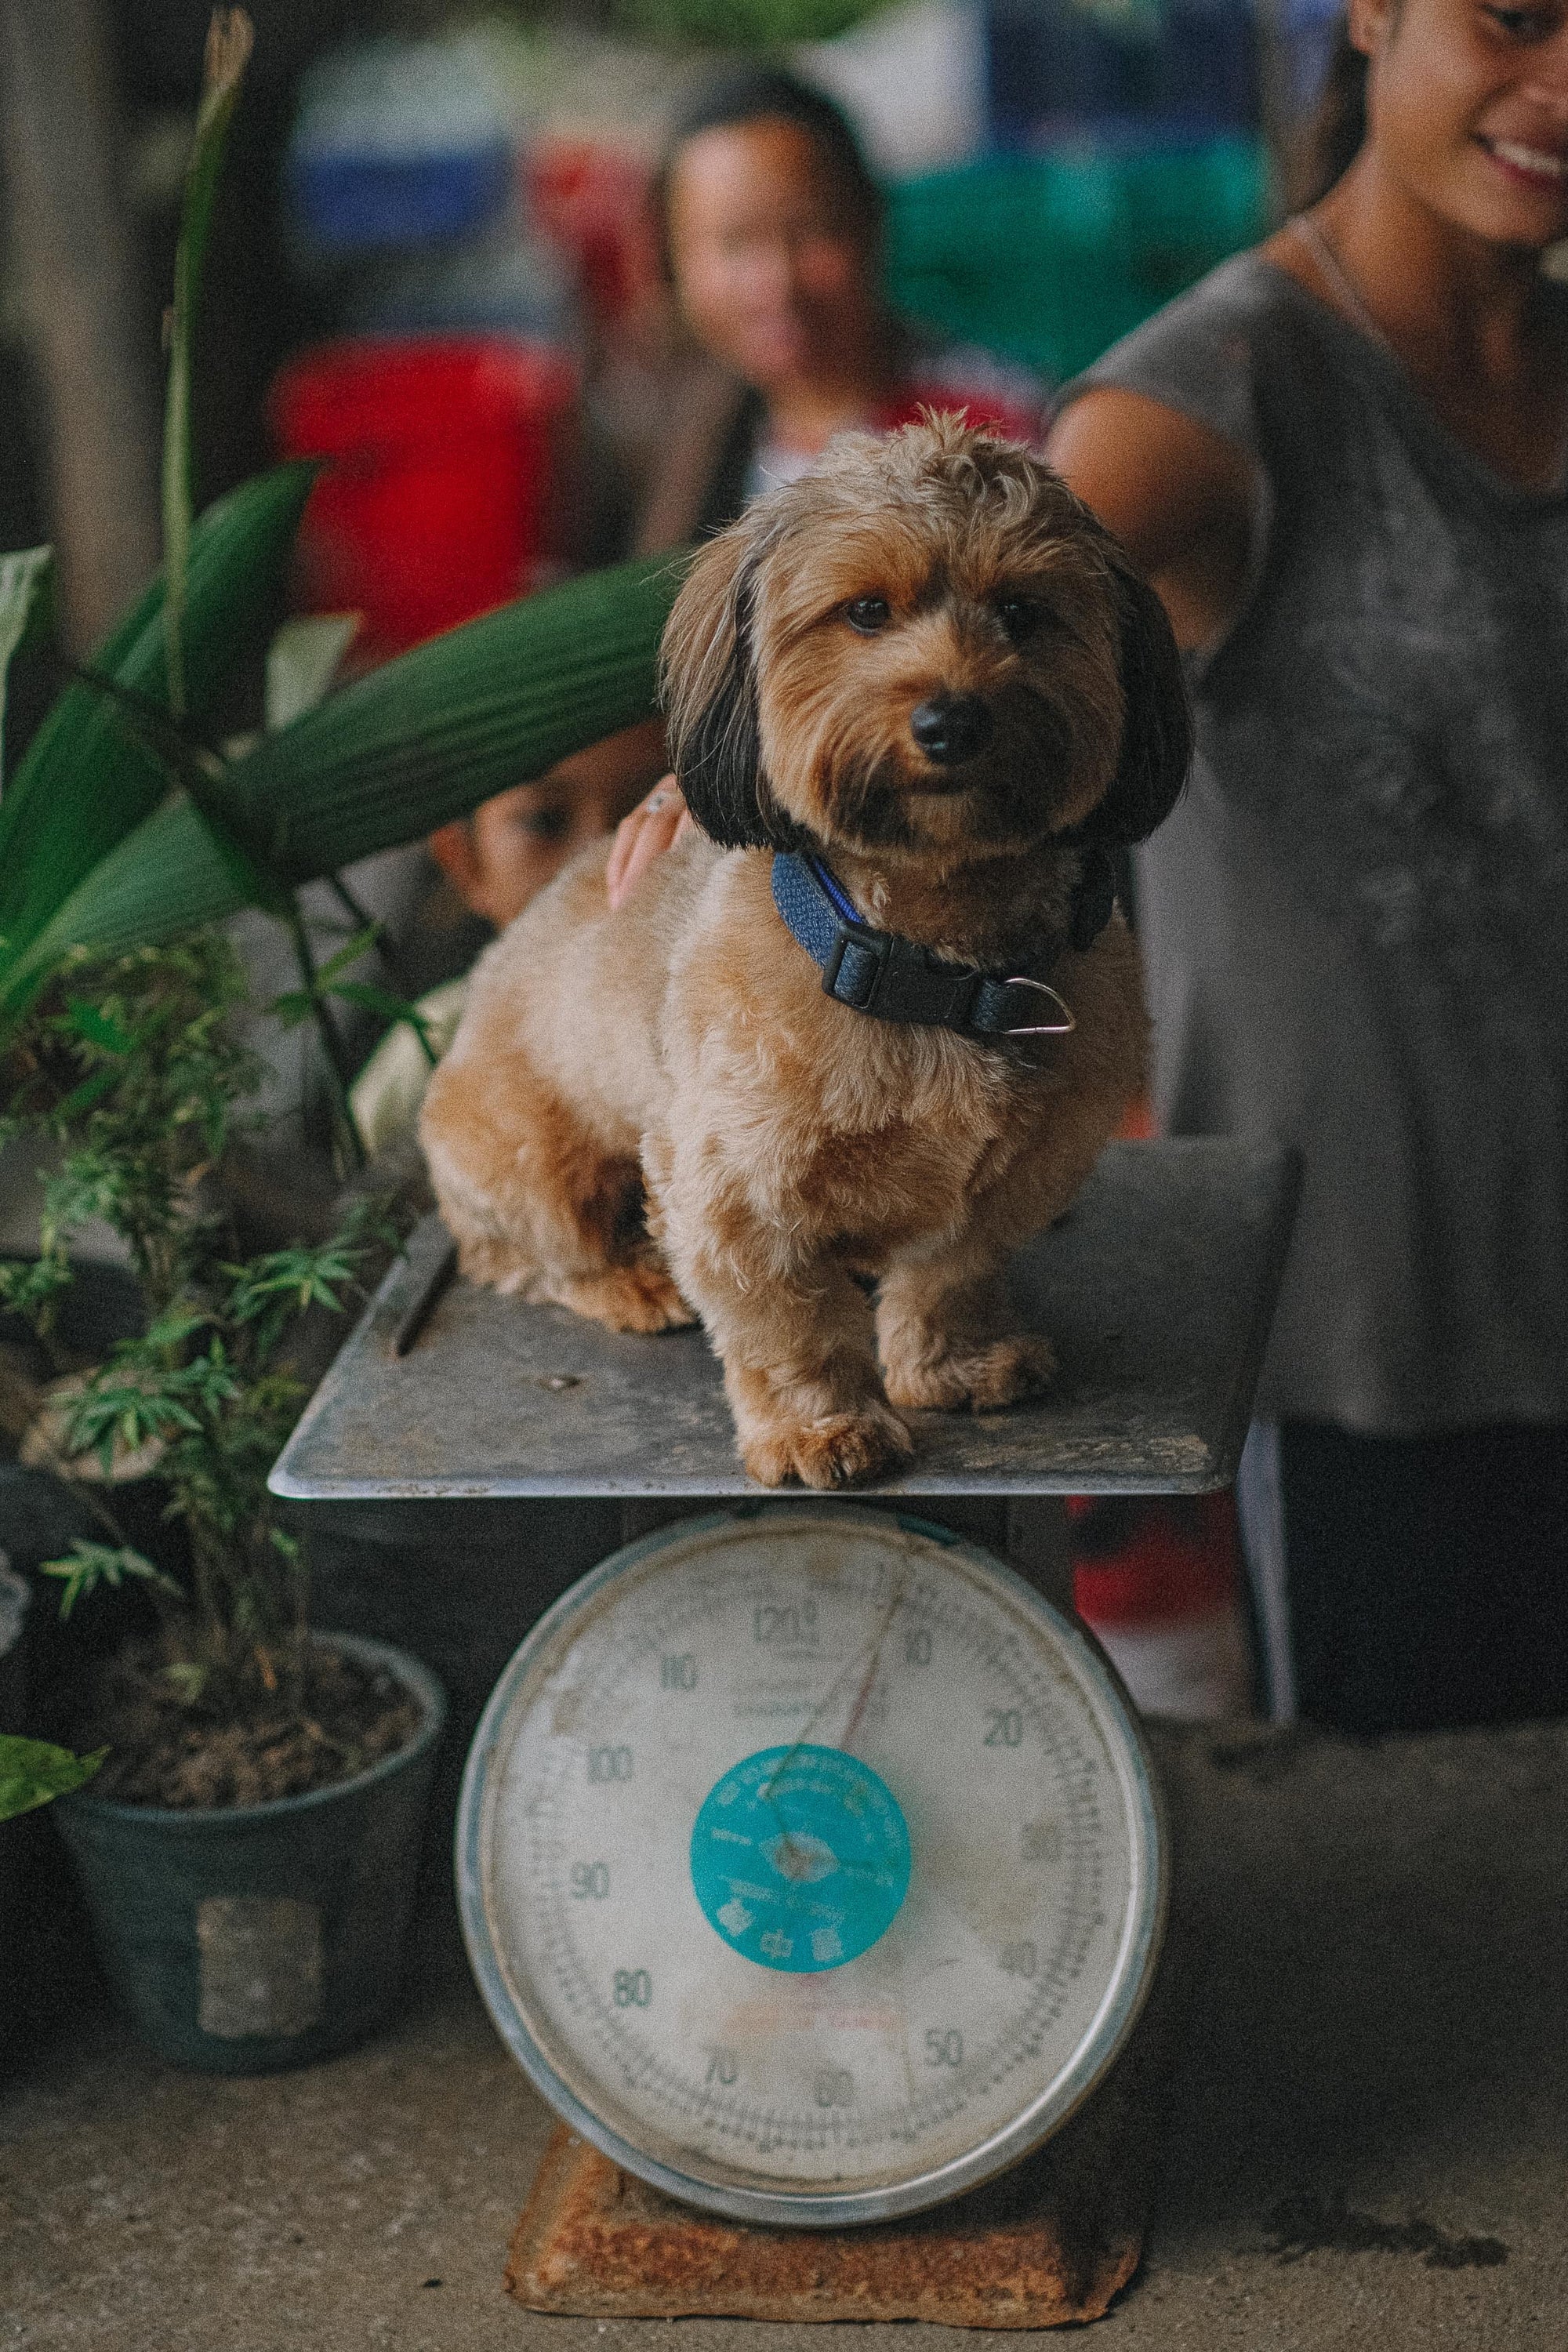 Small dog sitting on a weighing scale